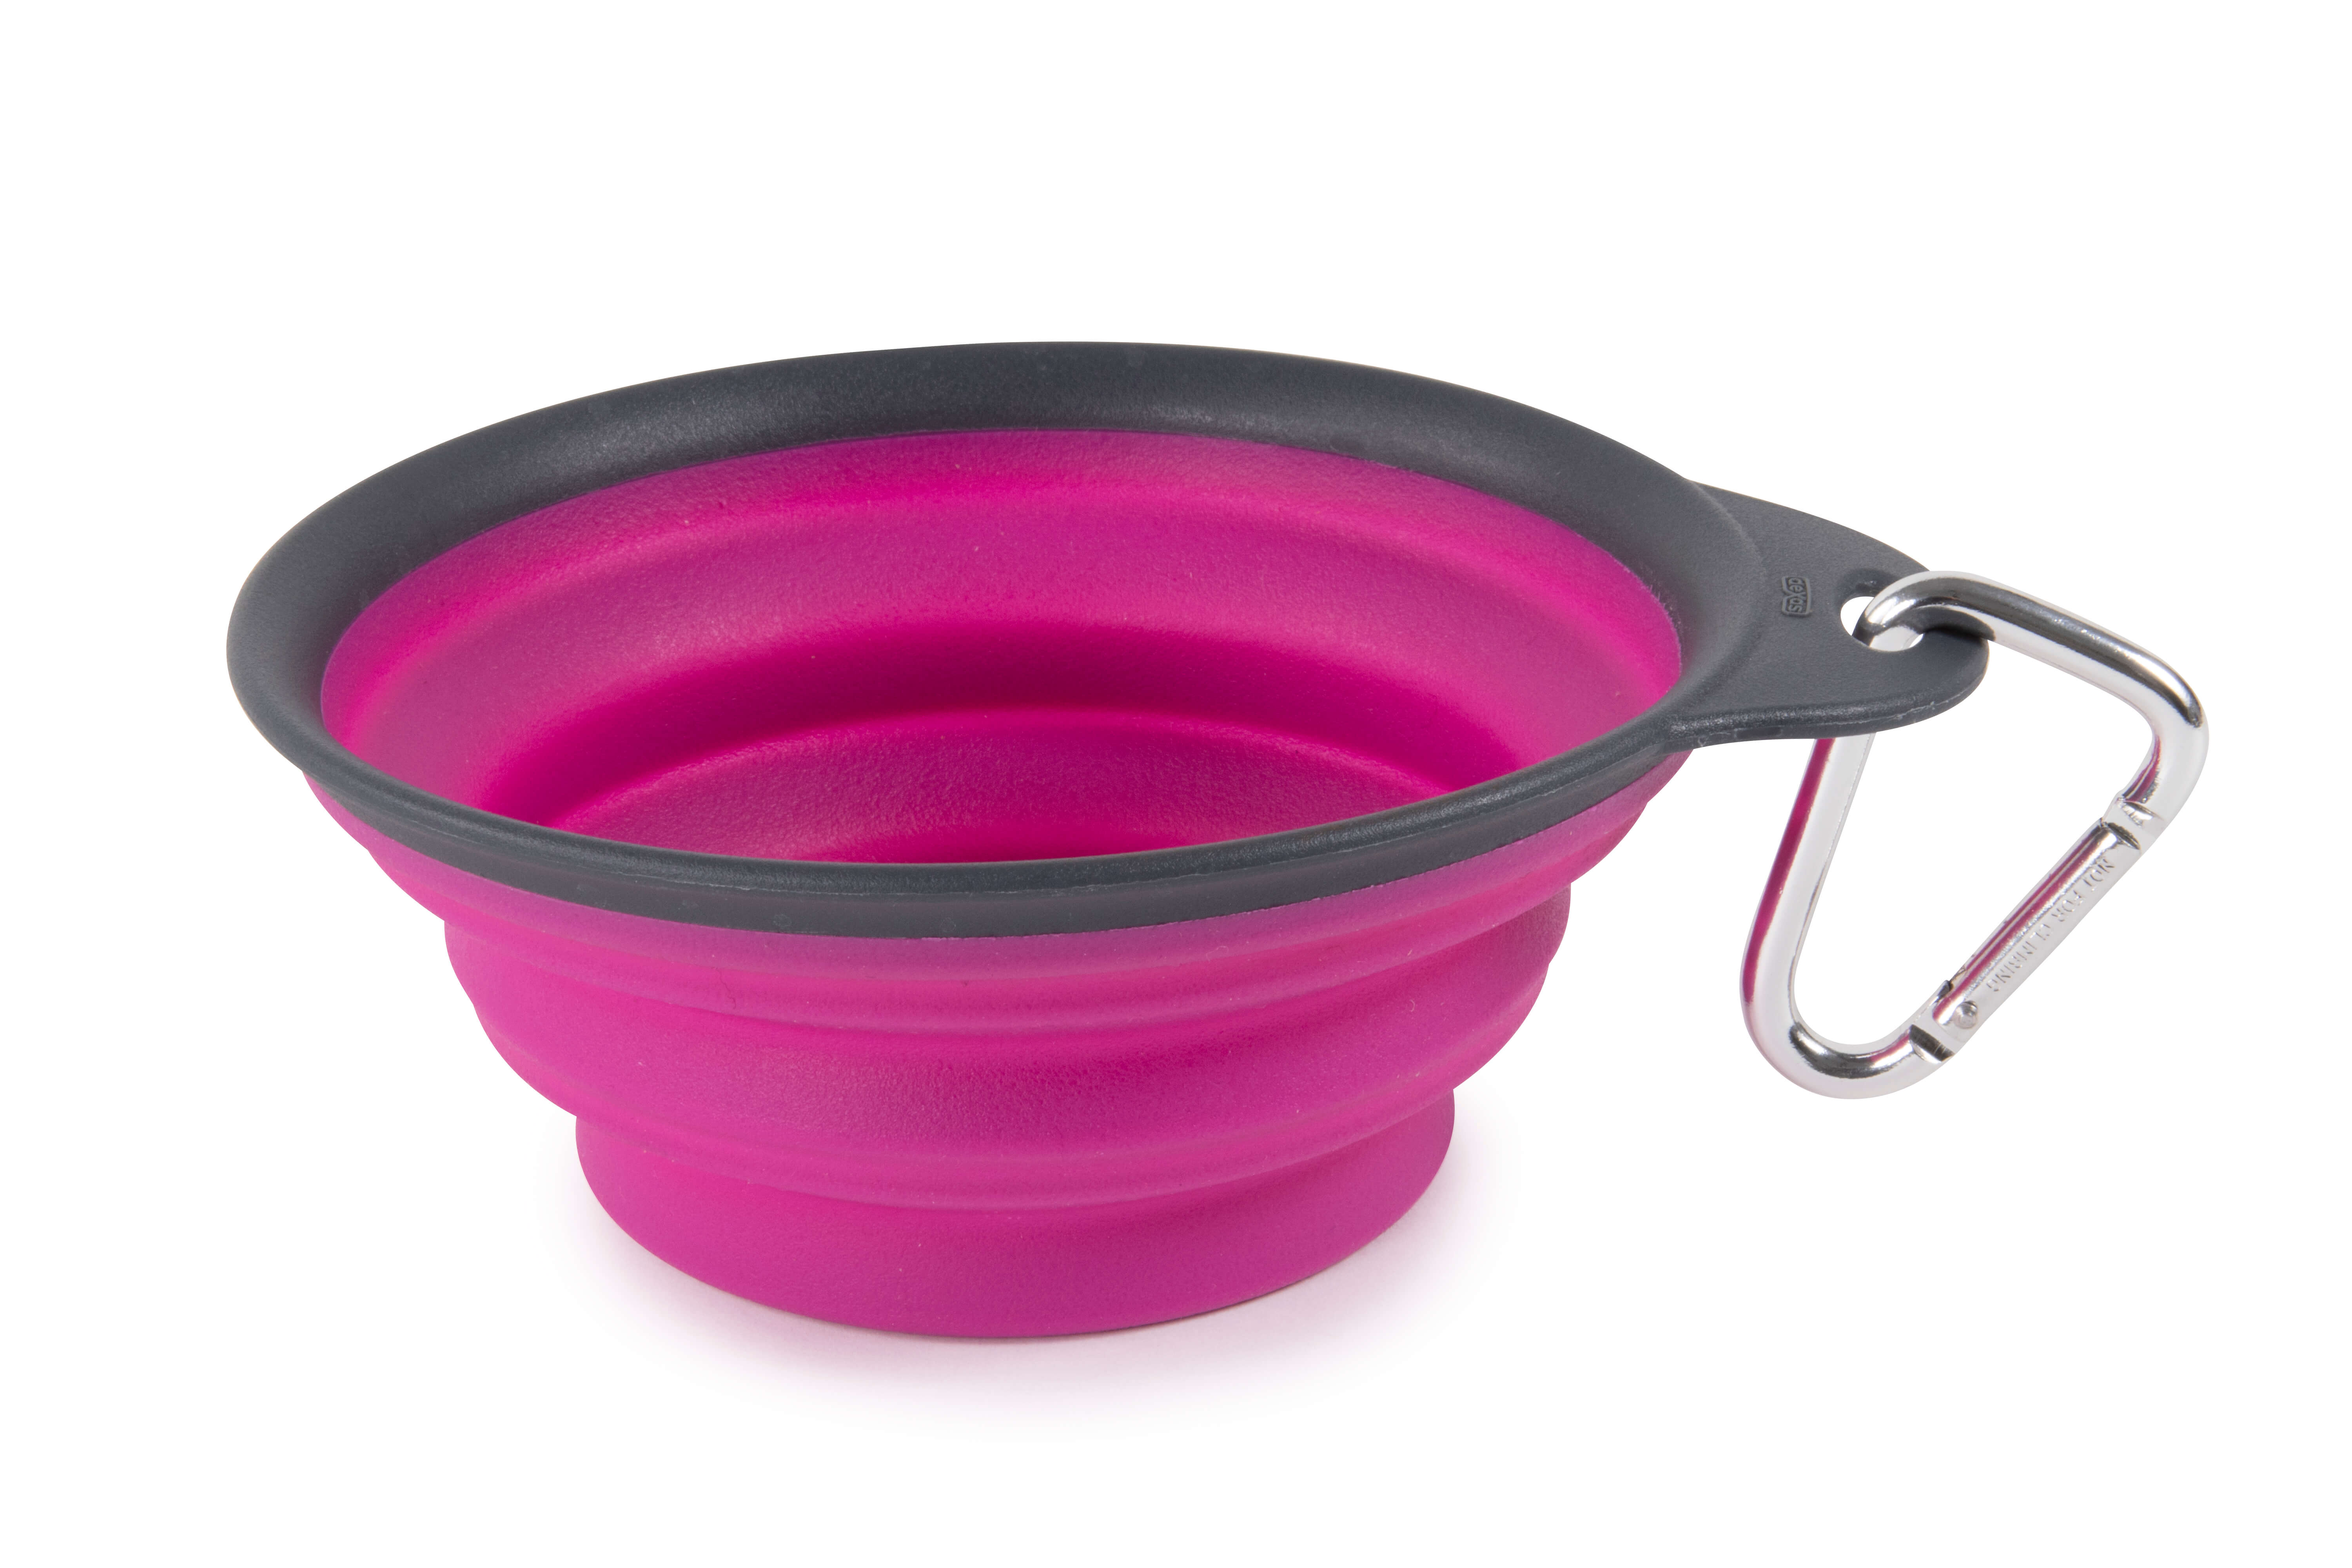 dexas travel bowl 2 cup for dogs in pink side view